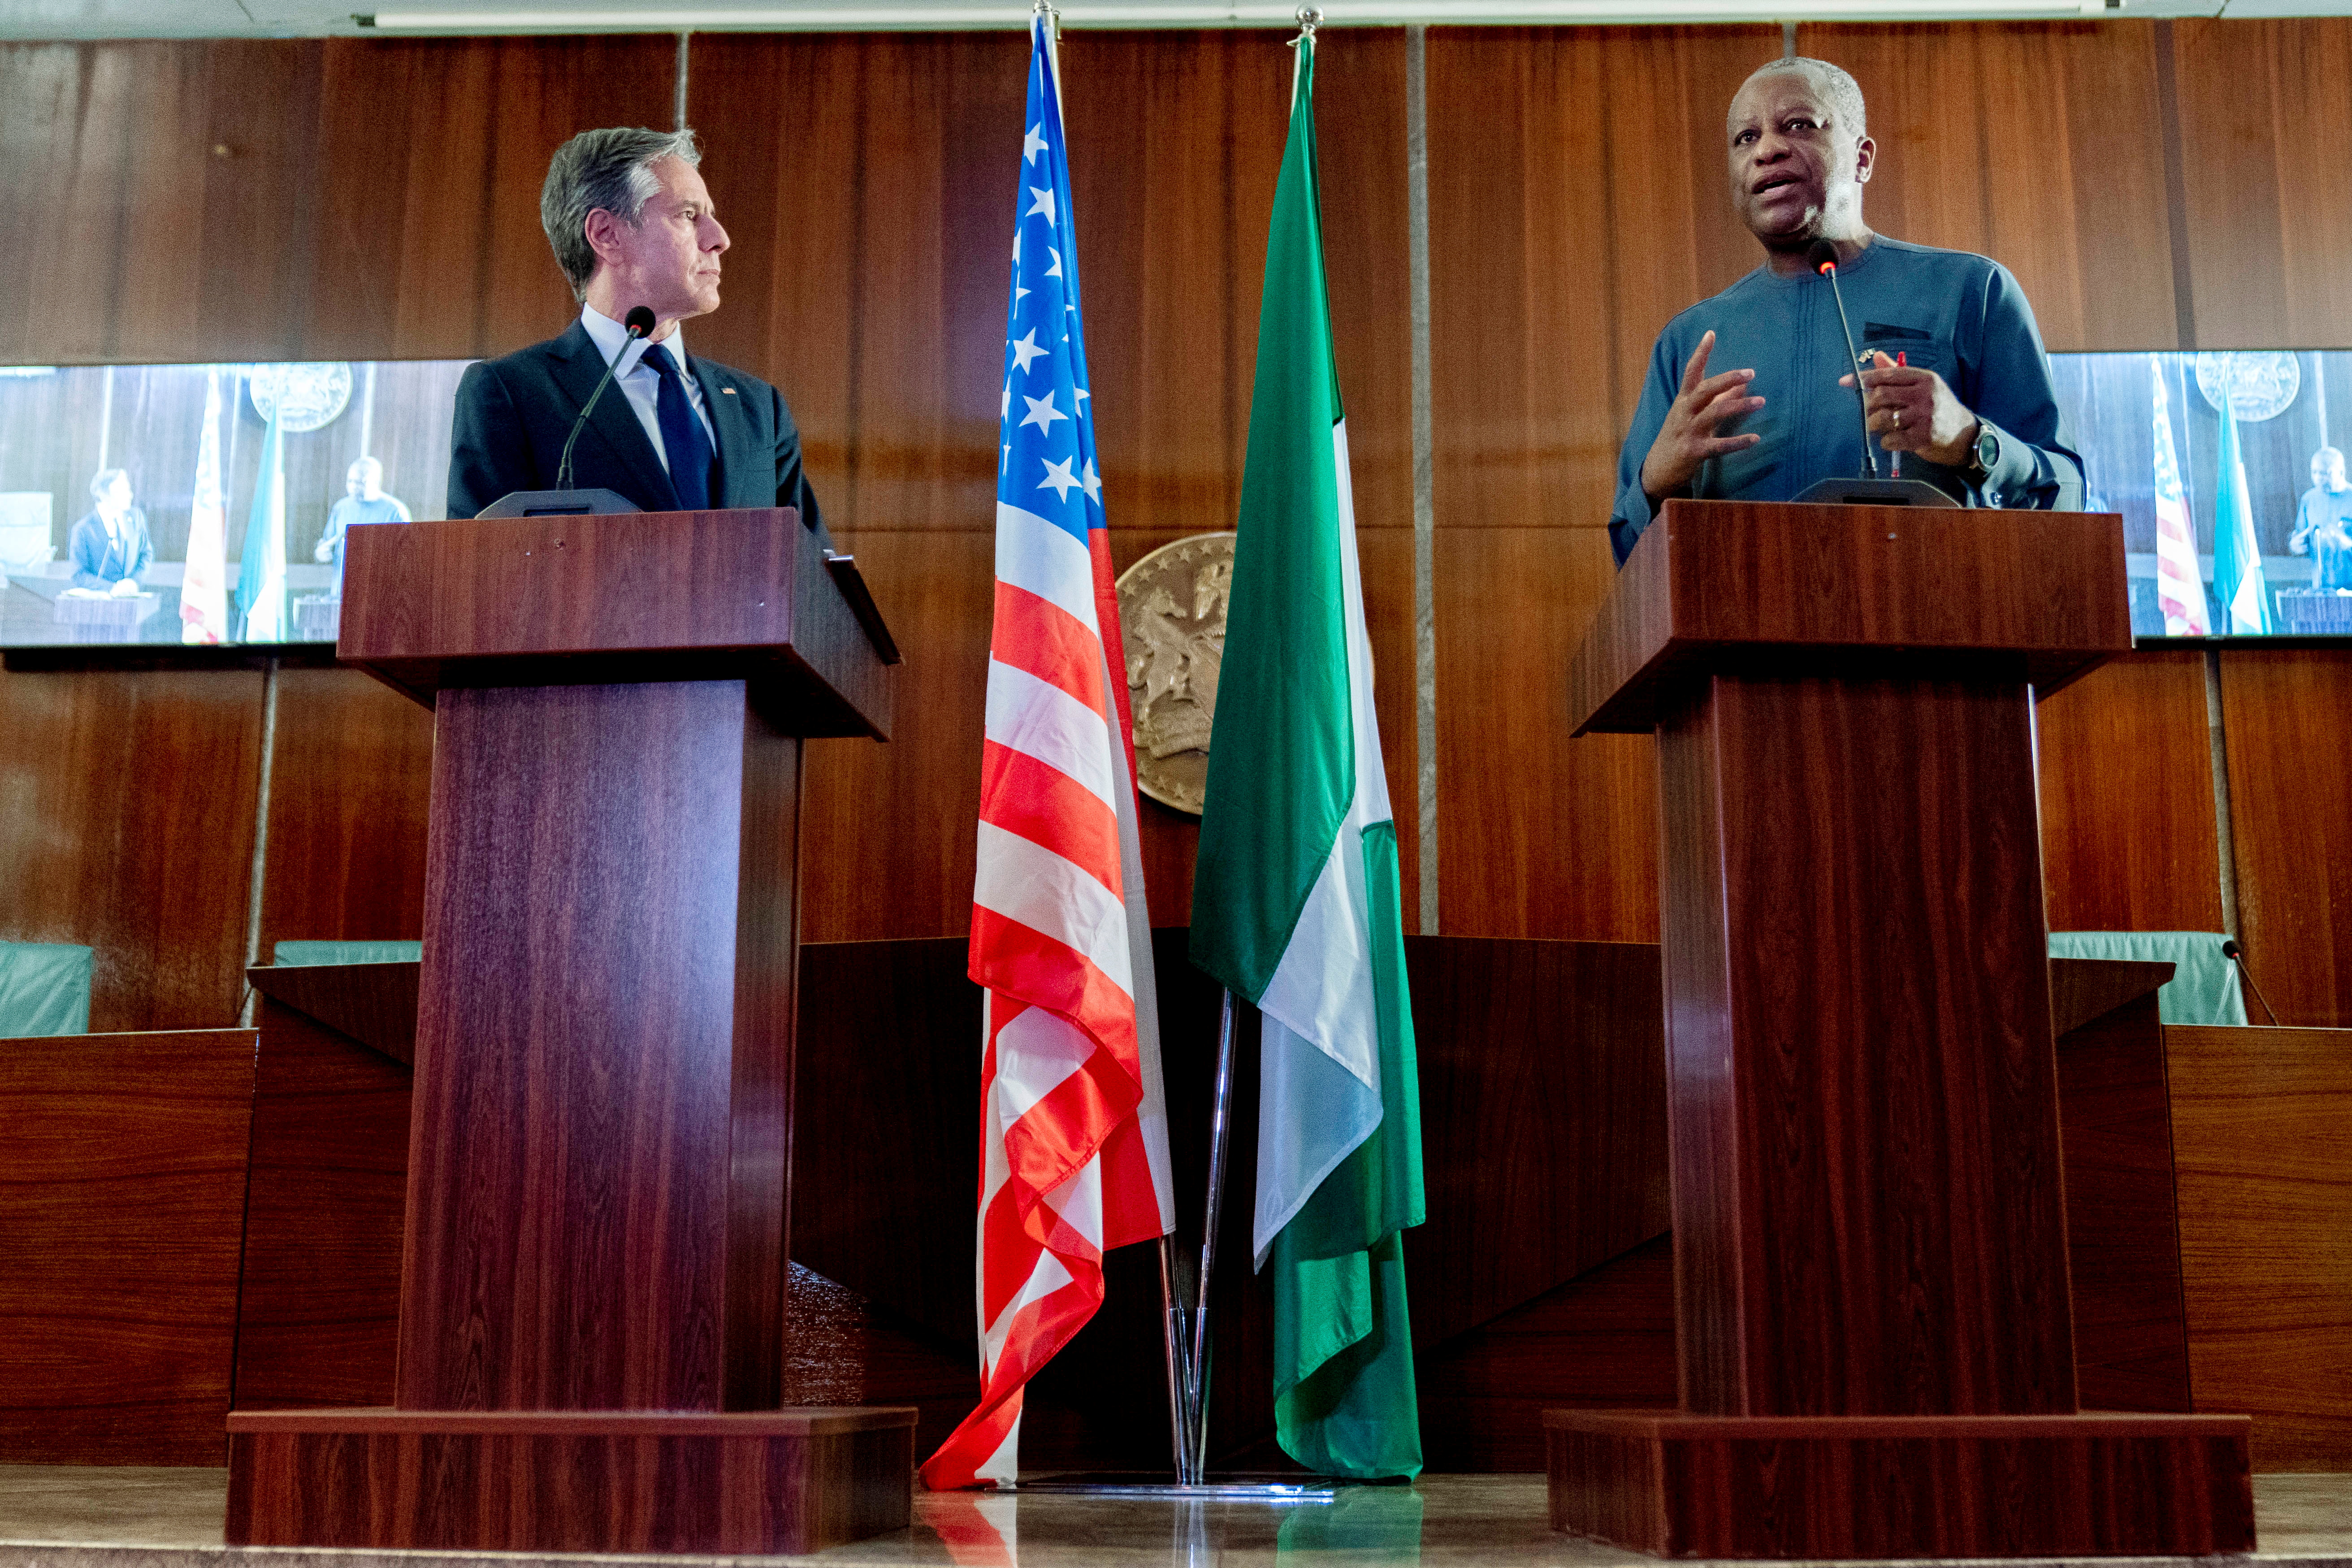 Nigerian Foreign Minister Geoffrey Onyeama, accompanied by Secretary of State Antony Blinken, attend a news conference at the Aso Rock Presidential Villa in Abuja, Nigeria, November 18, 2021. Andrew Harnik/Pool via REUTERS